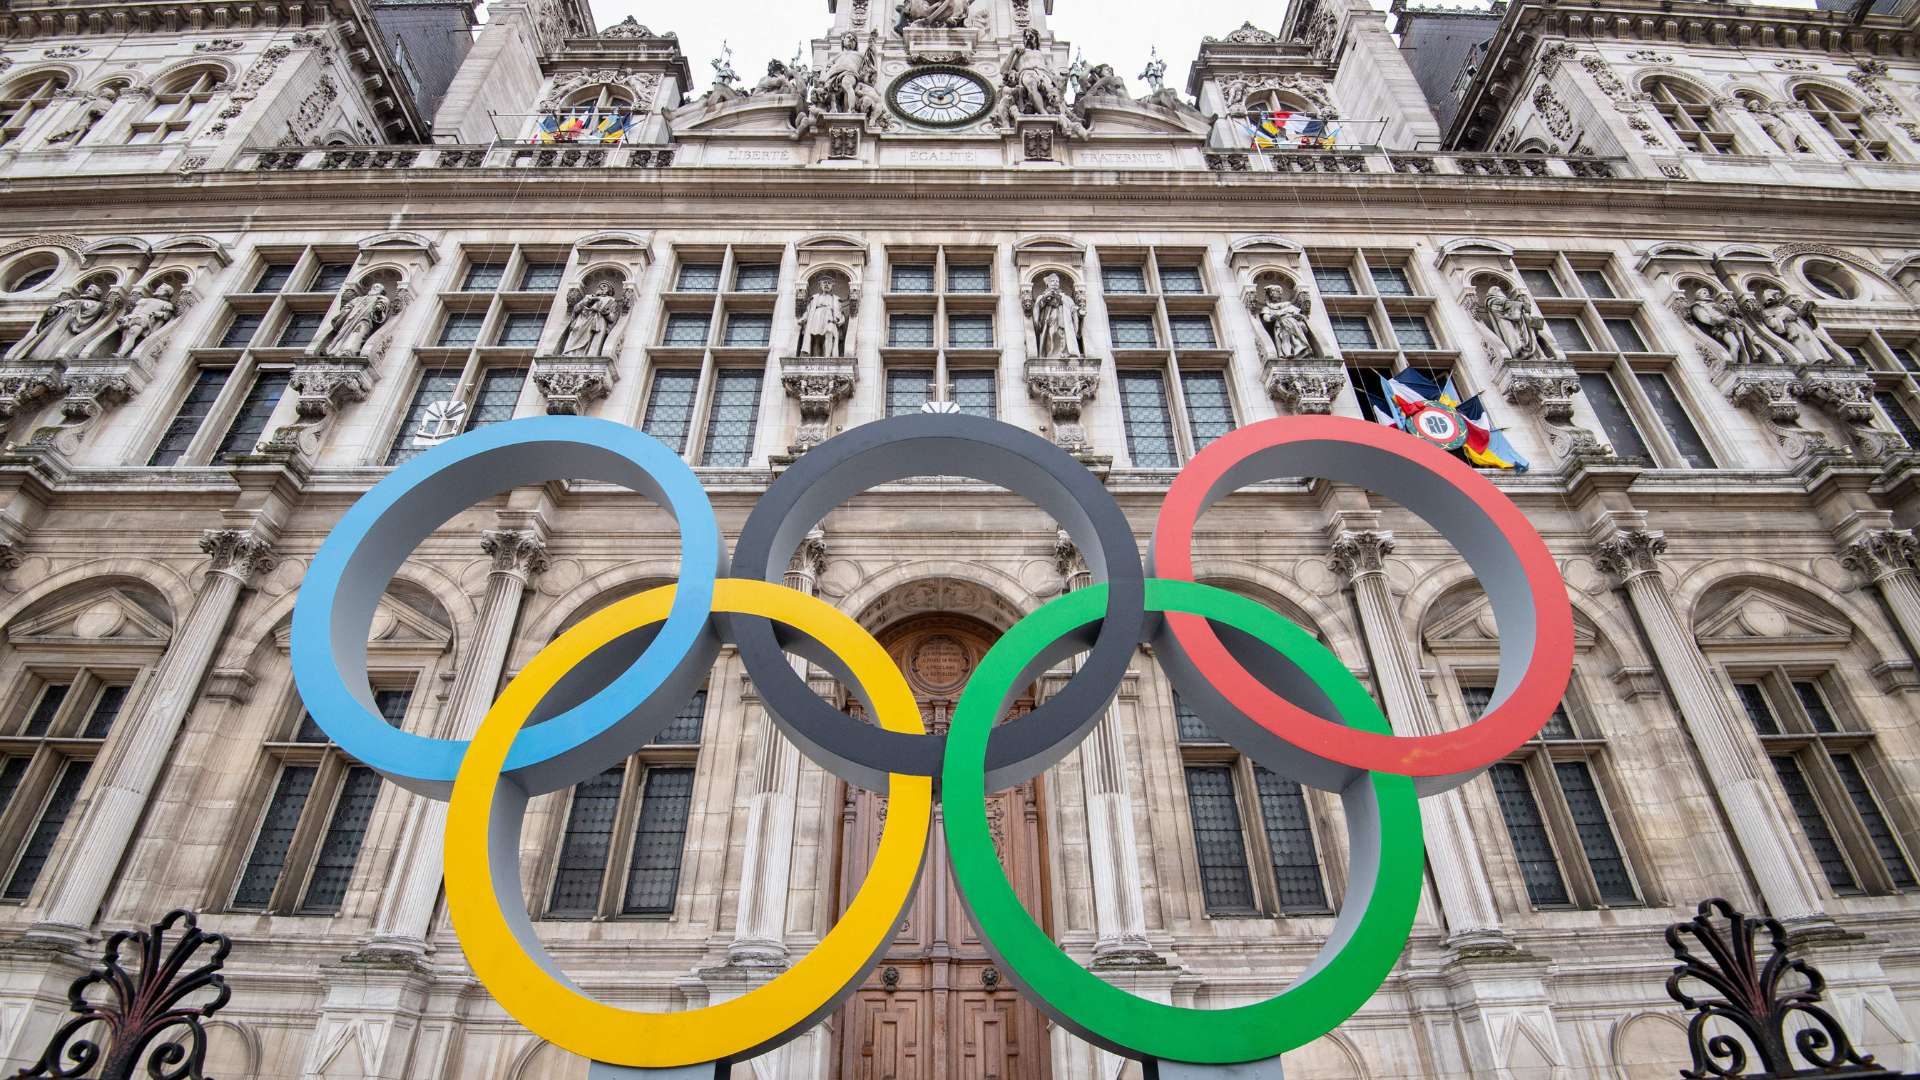 Olympic rings City Hall in Paris